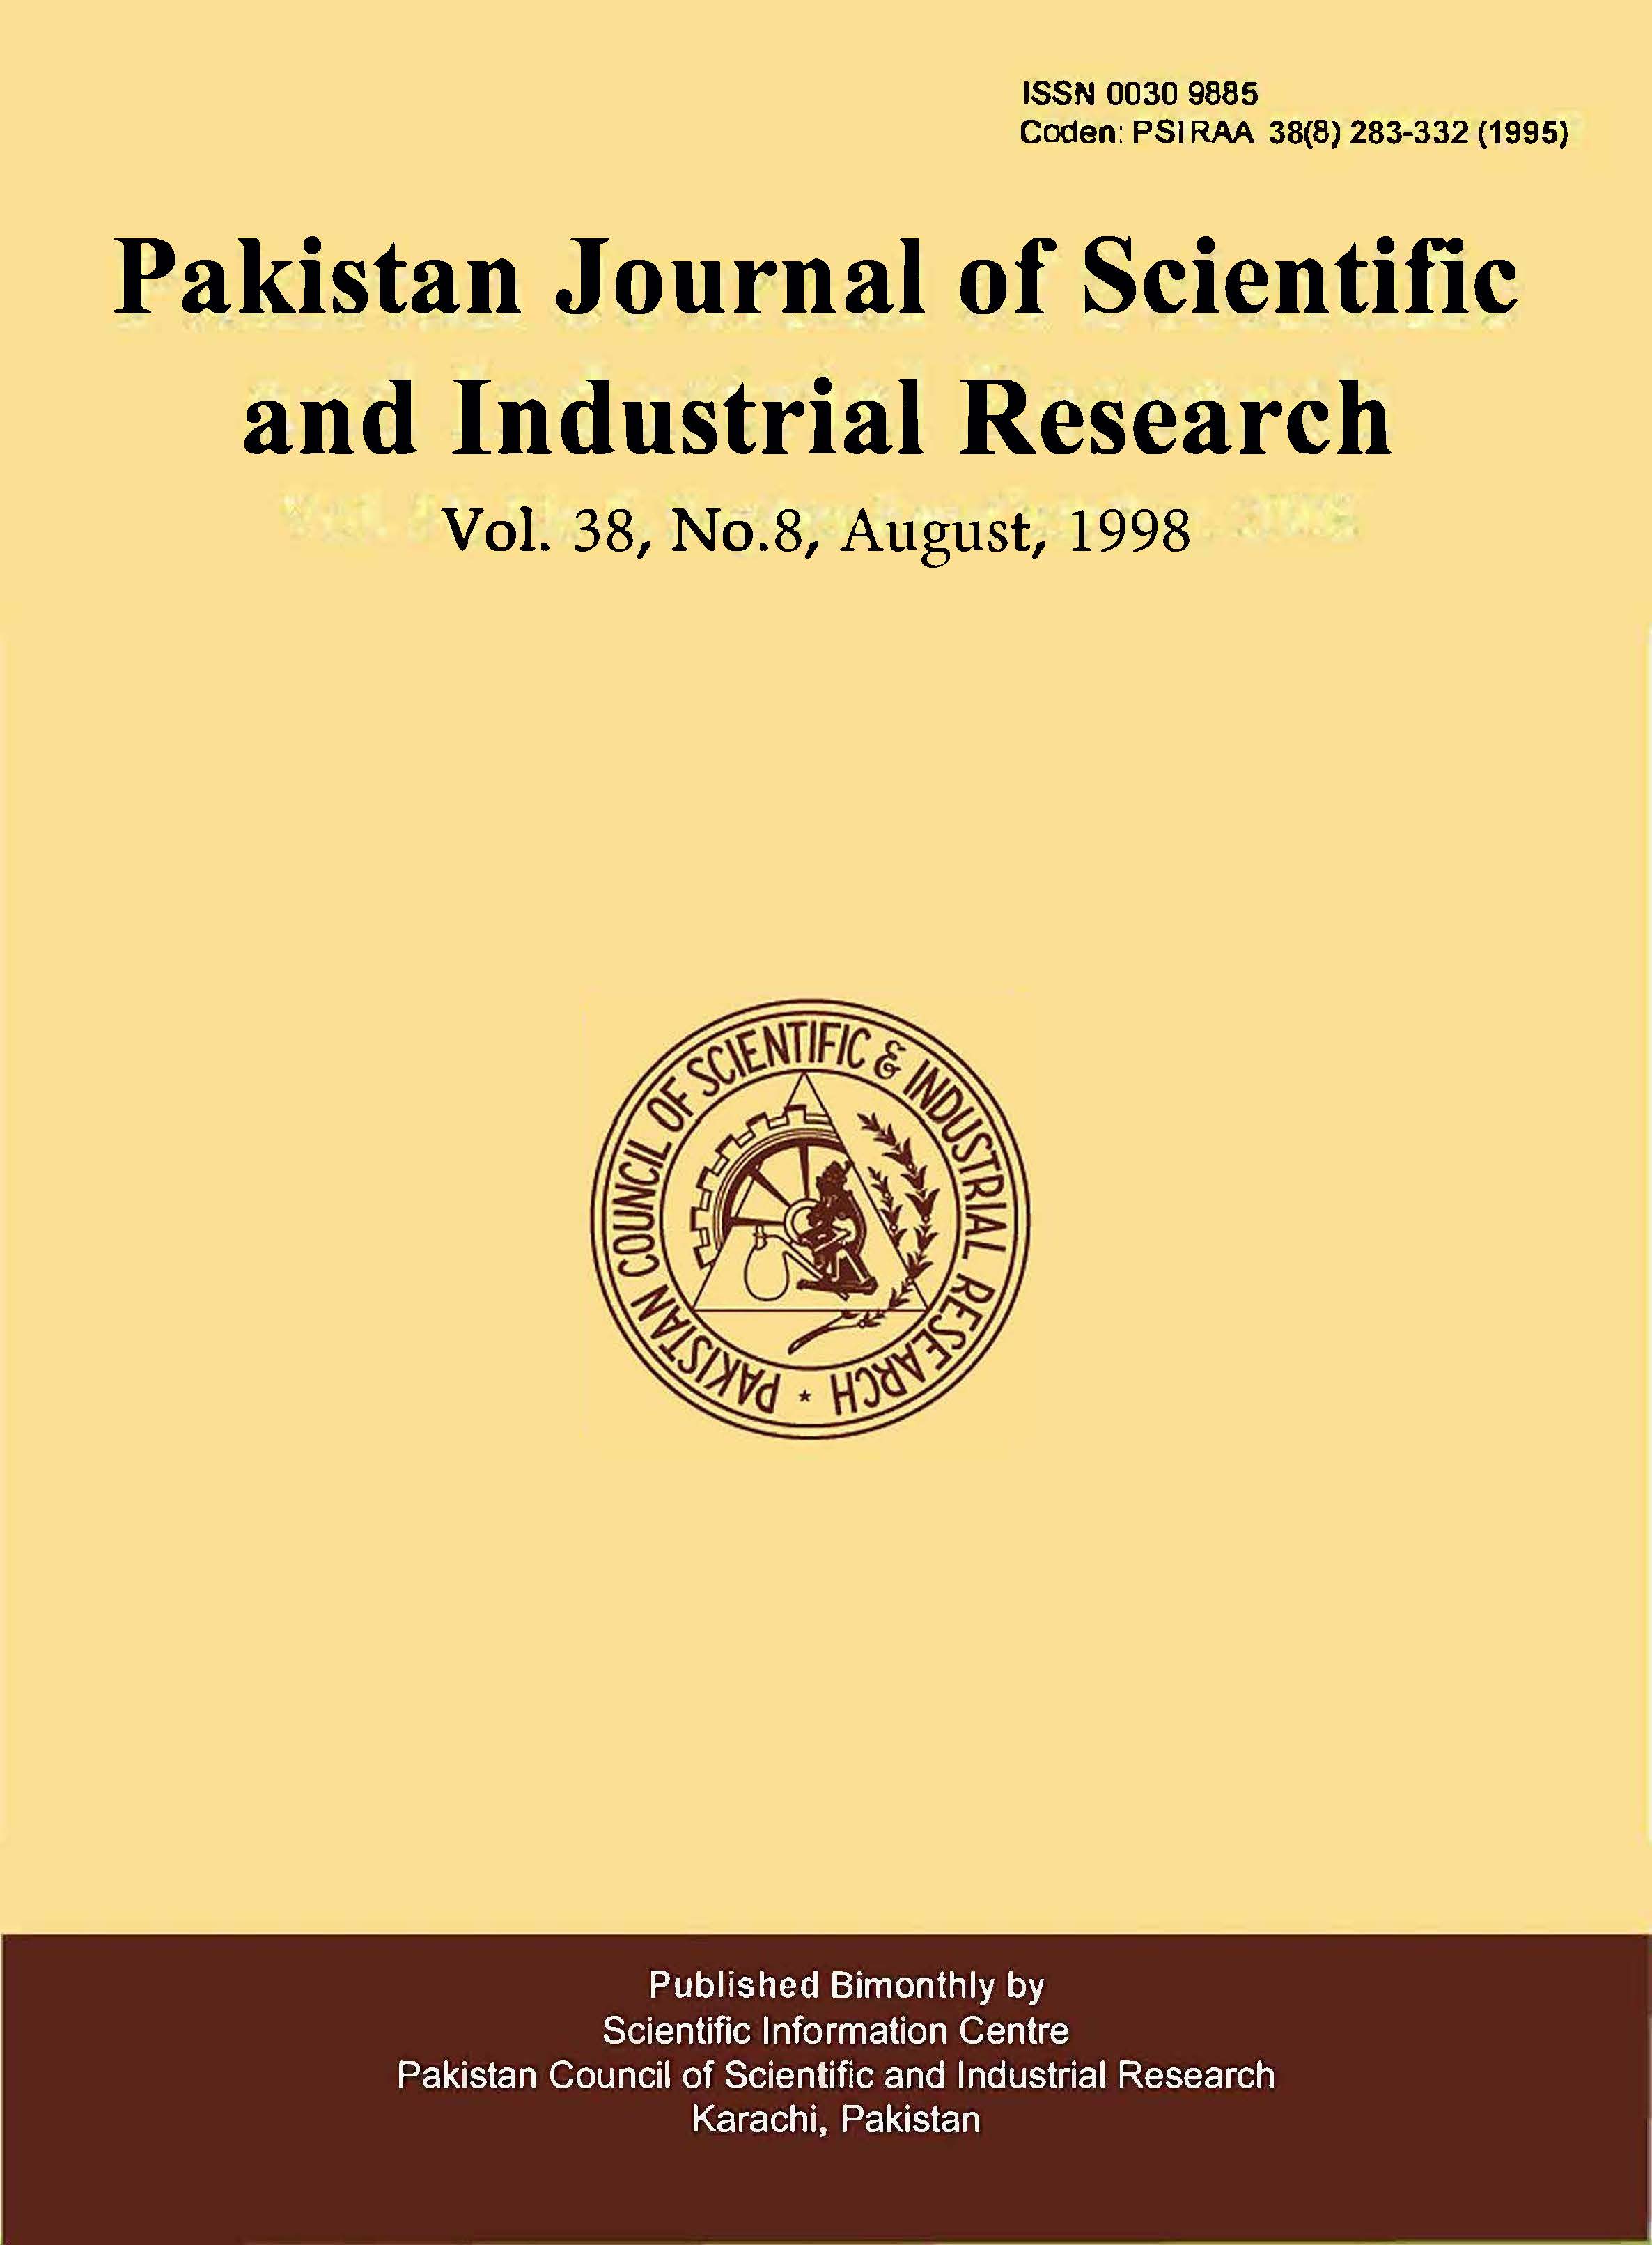 					View Vol. 38 No. 8 (1995): Pakistan Journal of Scientific and Industrial Research
				